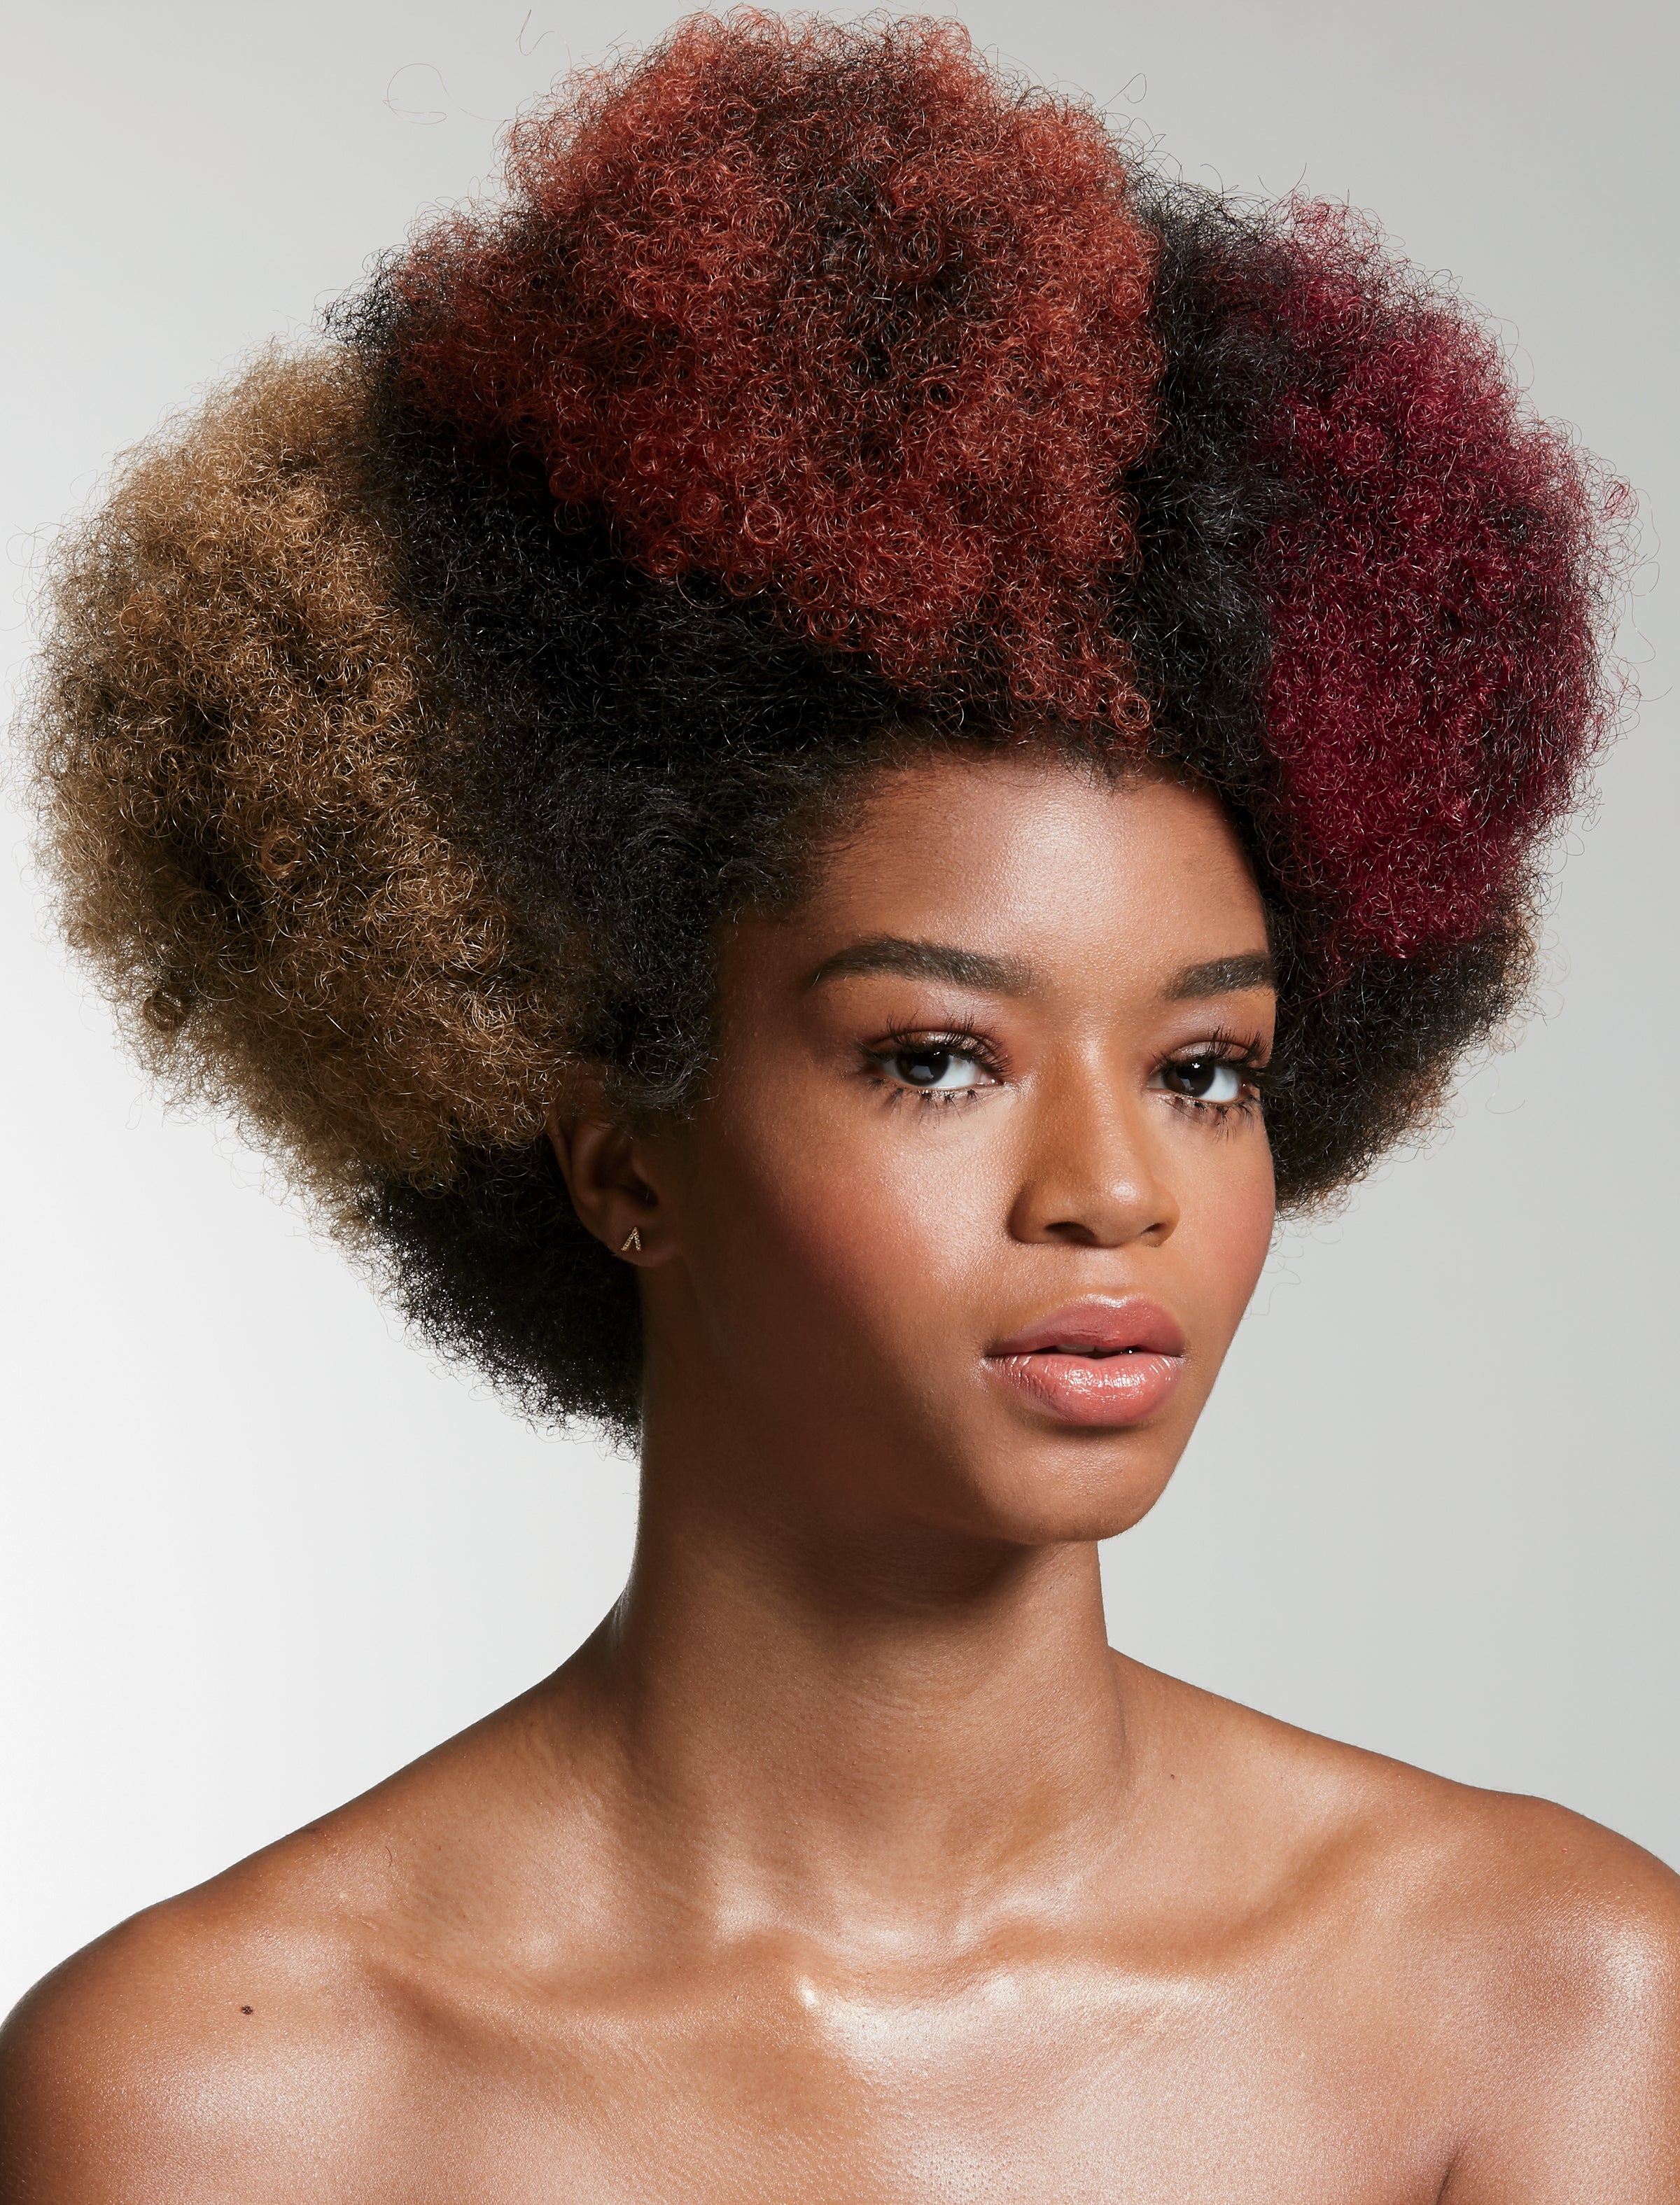 Terrific Textures: A Celebration Of Black Women's Incredible Crowns